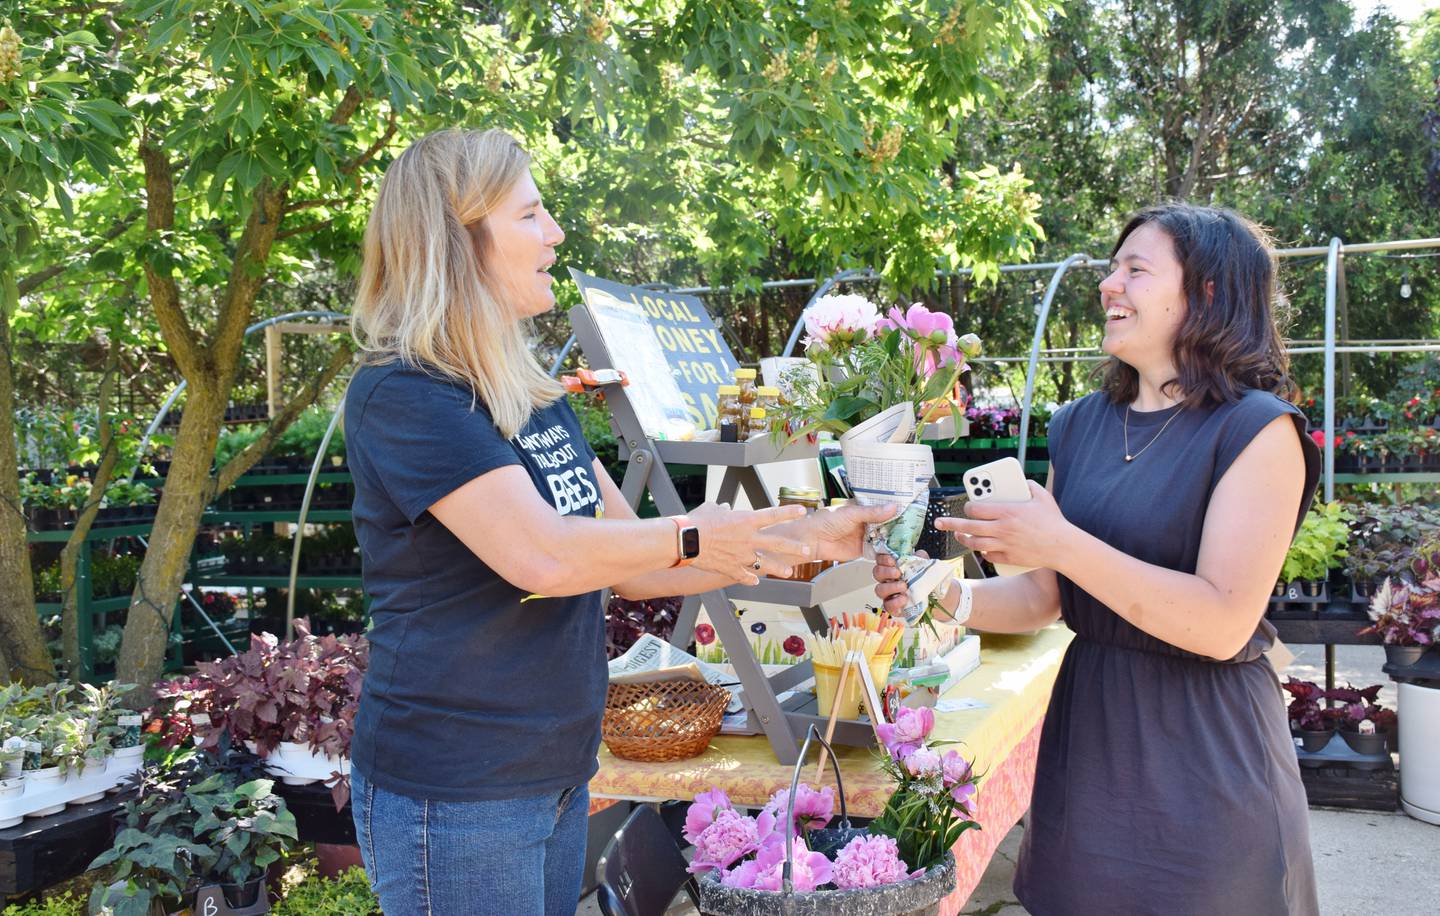 Diana Merry of Sterling, right, purchases peonies from Nancy Perrotta, left, owner of Little Red Truck Apiary, during at the Sycamore farmers market Tuesday.